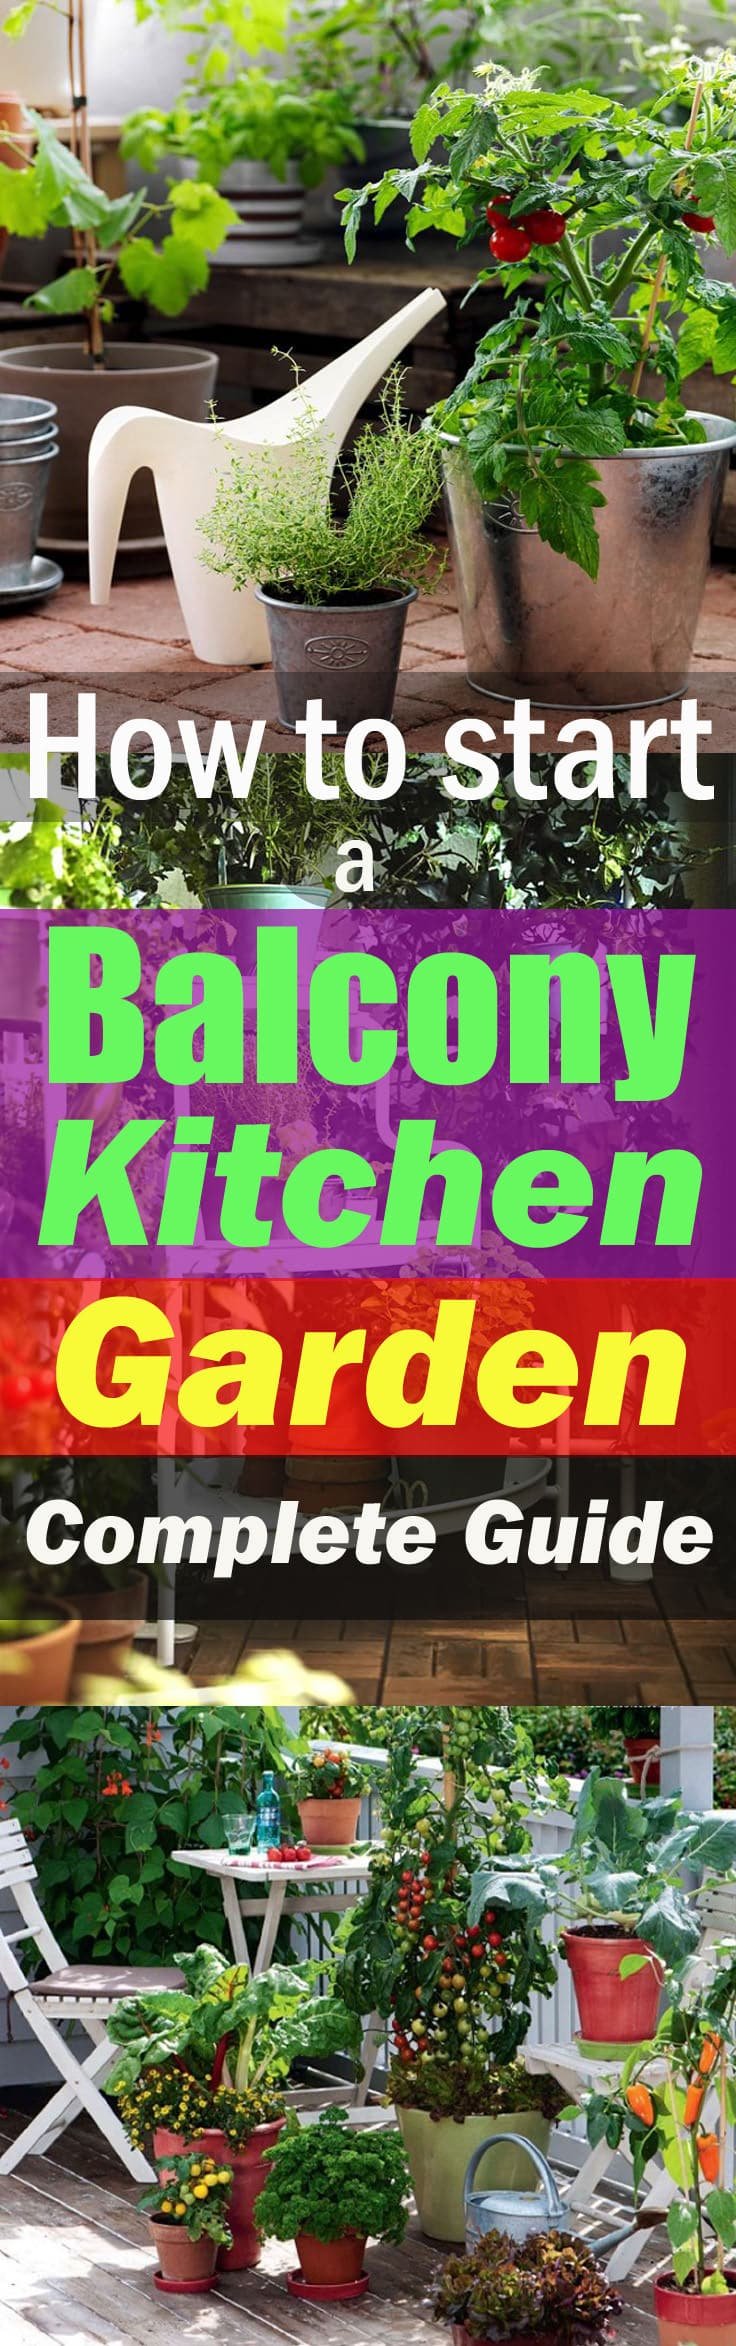 Instead of having a dull and deserted balcony, use it to create a Balcony Kitchen Garden where you can grow fresh organic food. Read on!